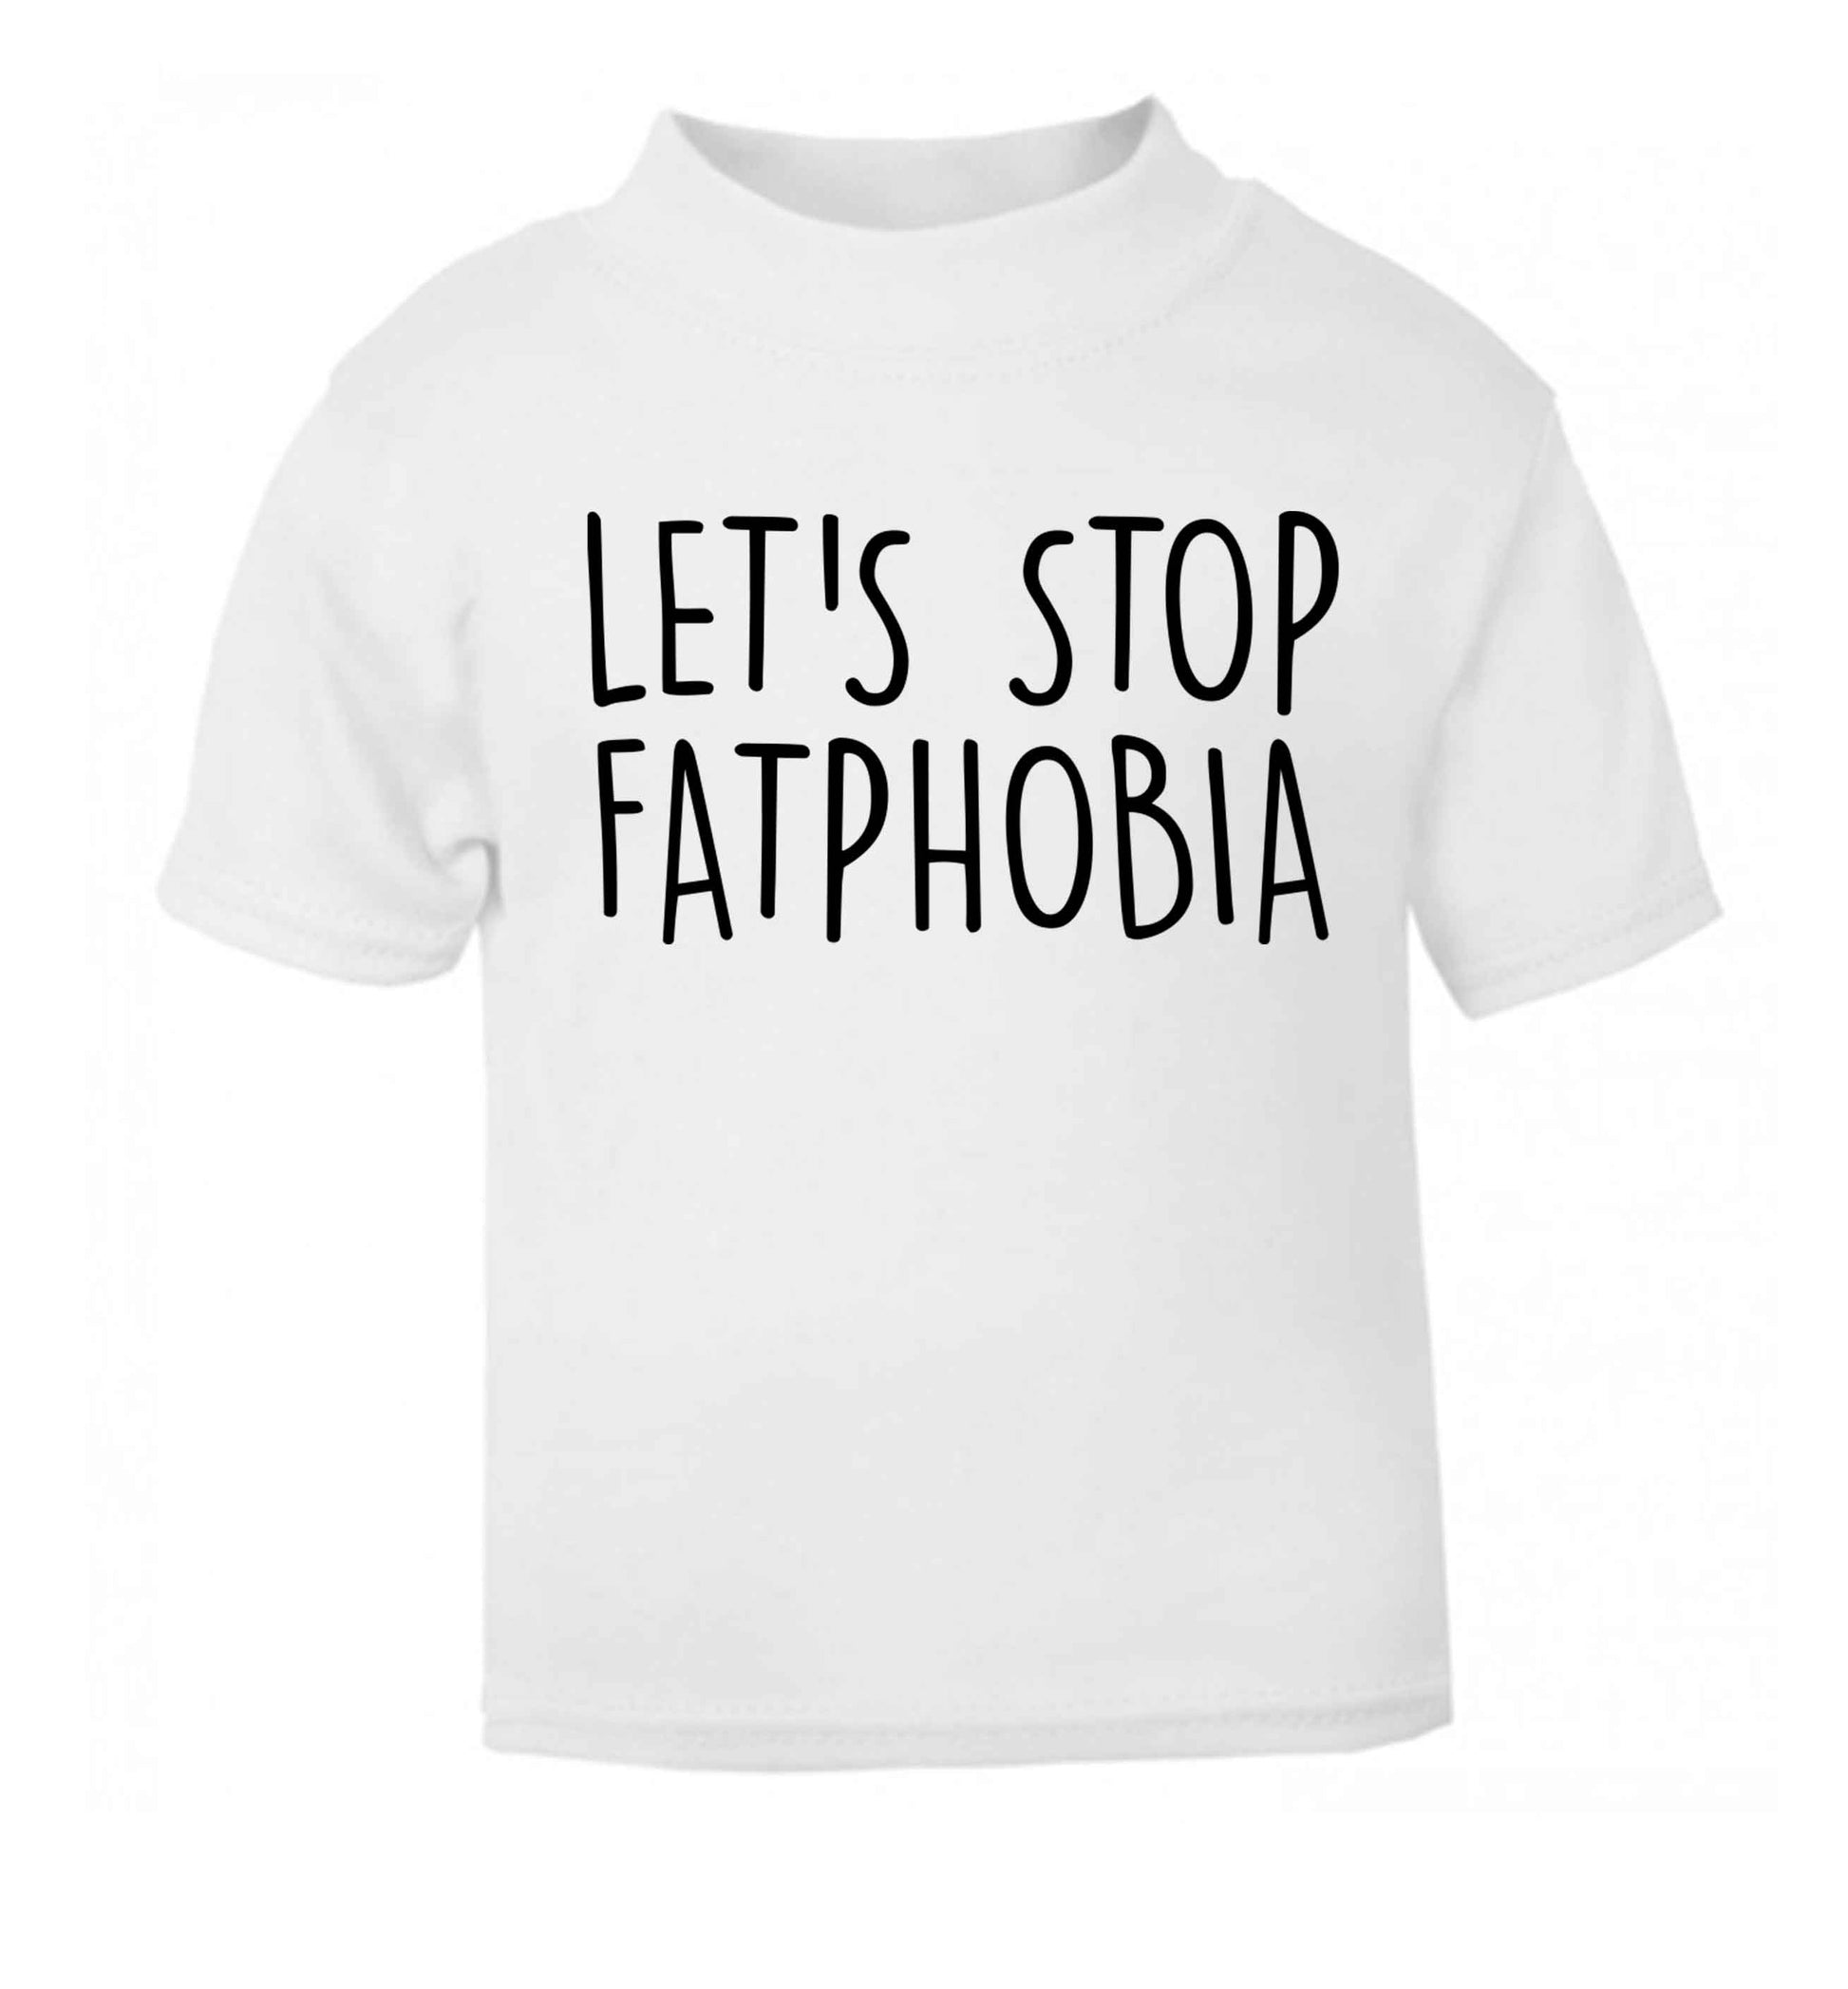 Let's stop fatphobia white baby toddler Tshirt 2 Years